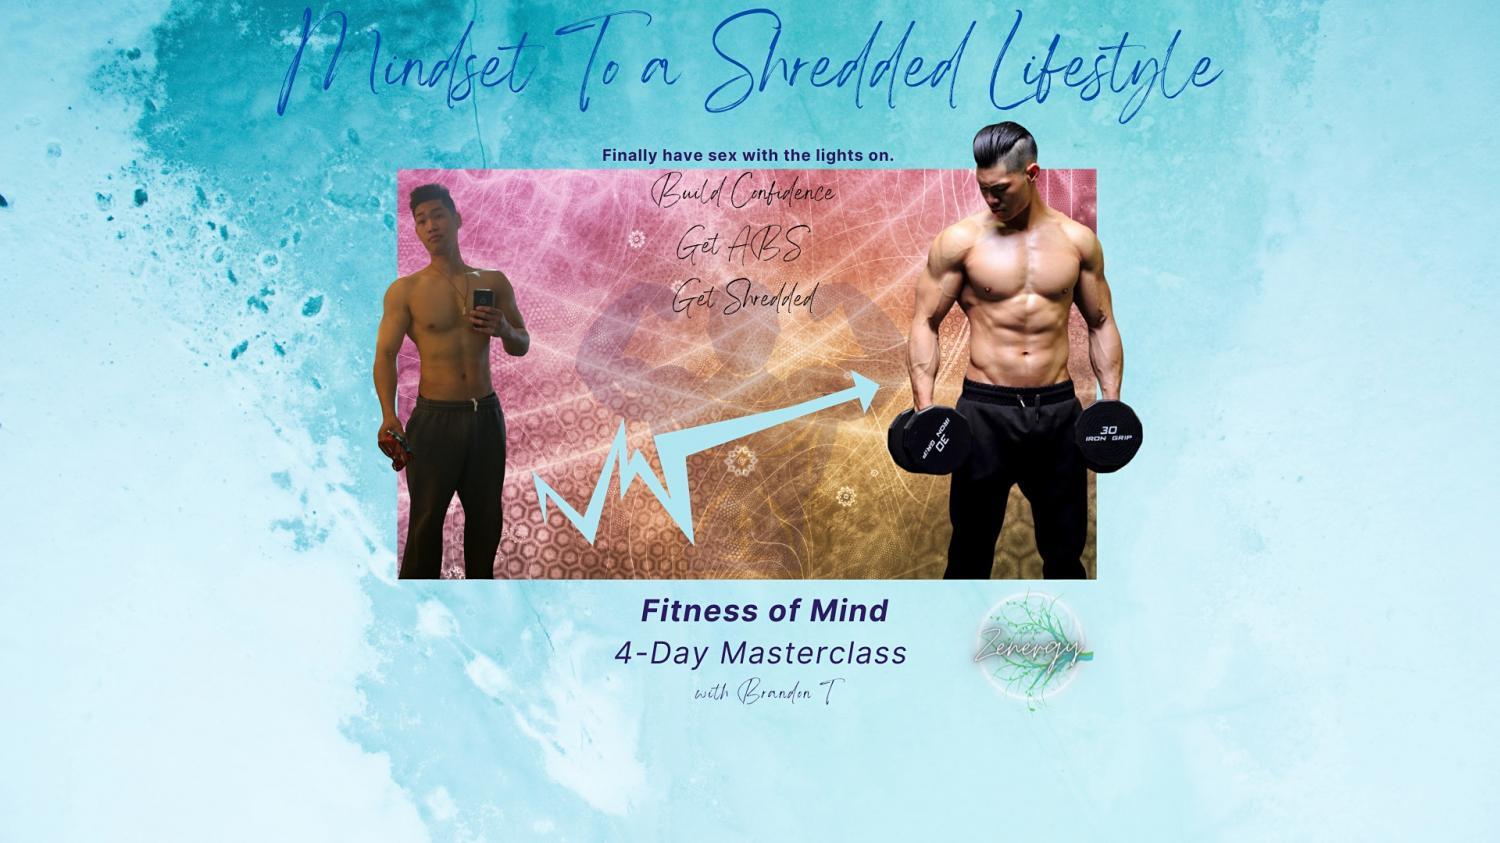 Get Shredded by Transforming Your Lifestyle - Cape Coral
Tue Nov 1, 2:00 PM - Tue Nov 1, 3:00 PM
in 12 days